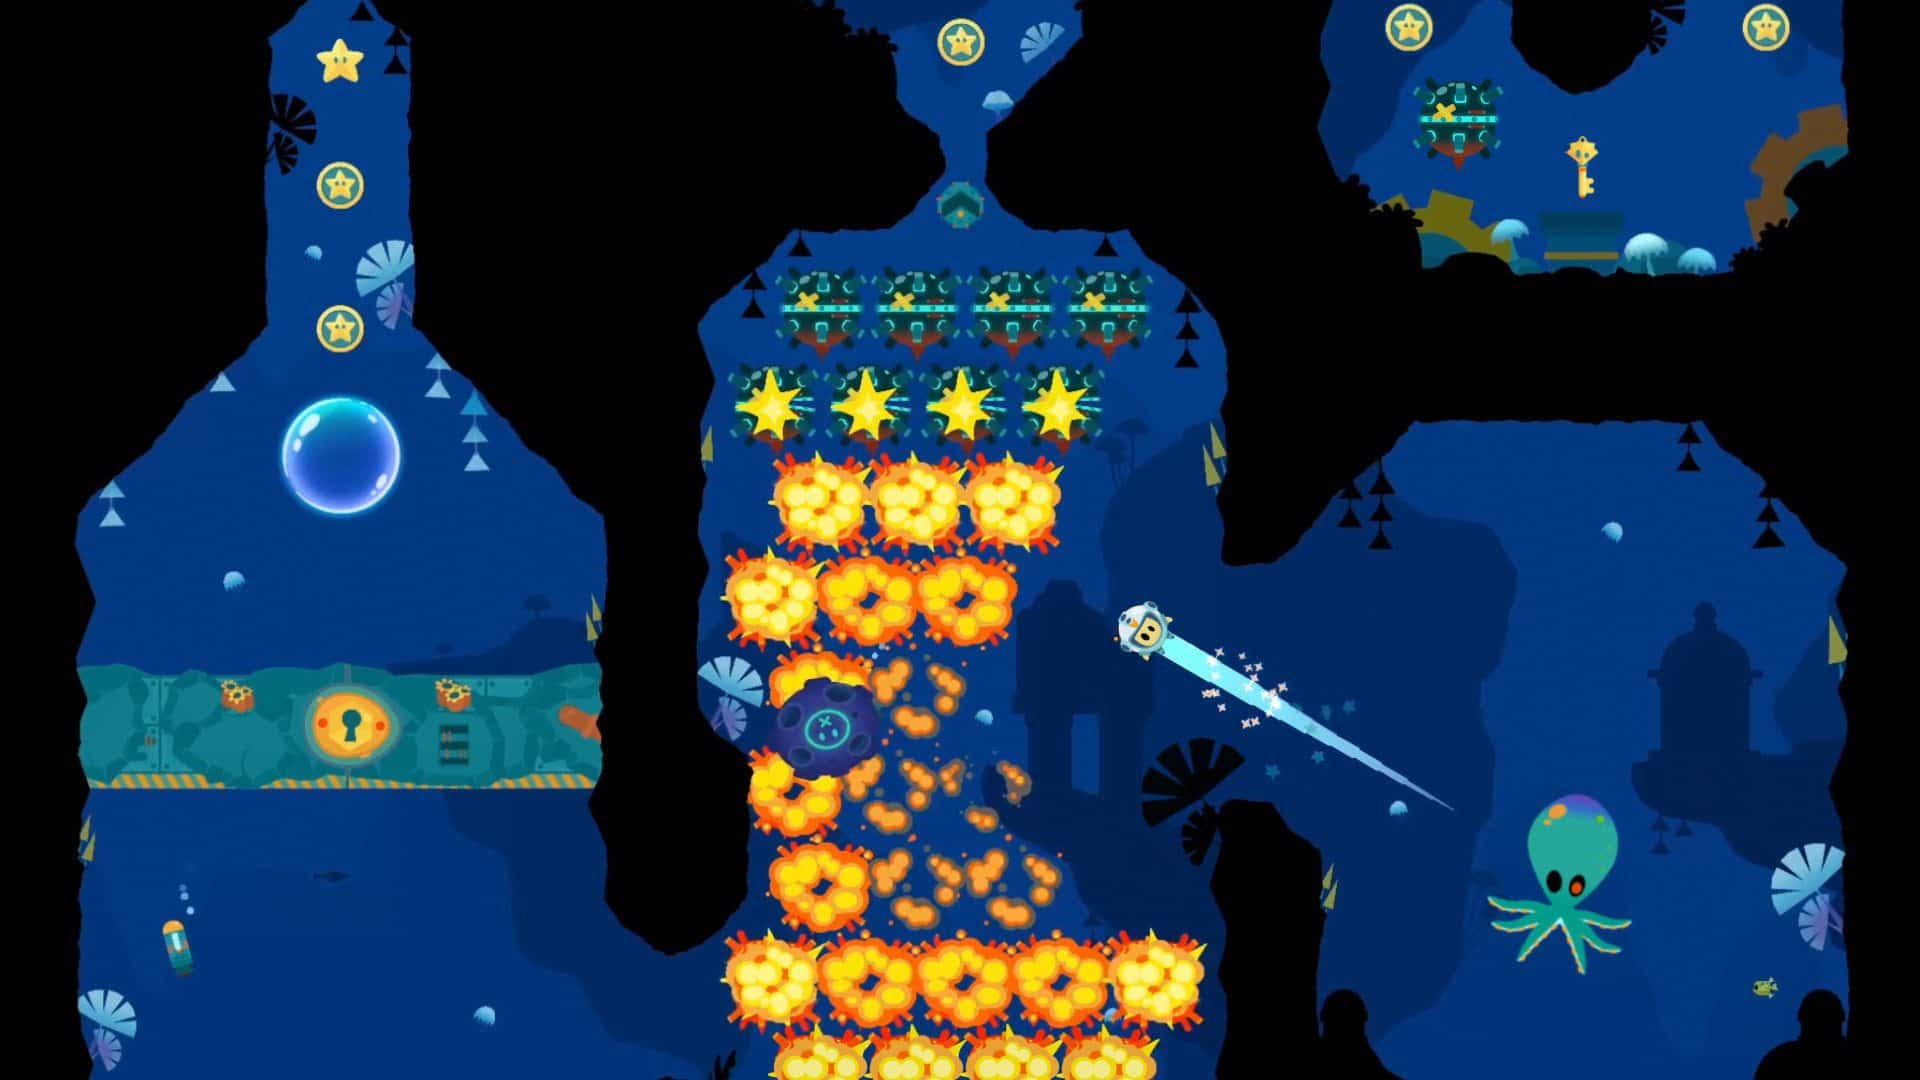 Surface Rush game underwater scene with explosions and sea creatures